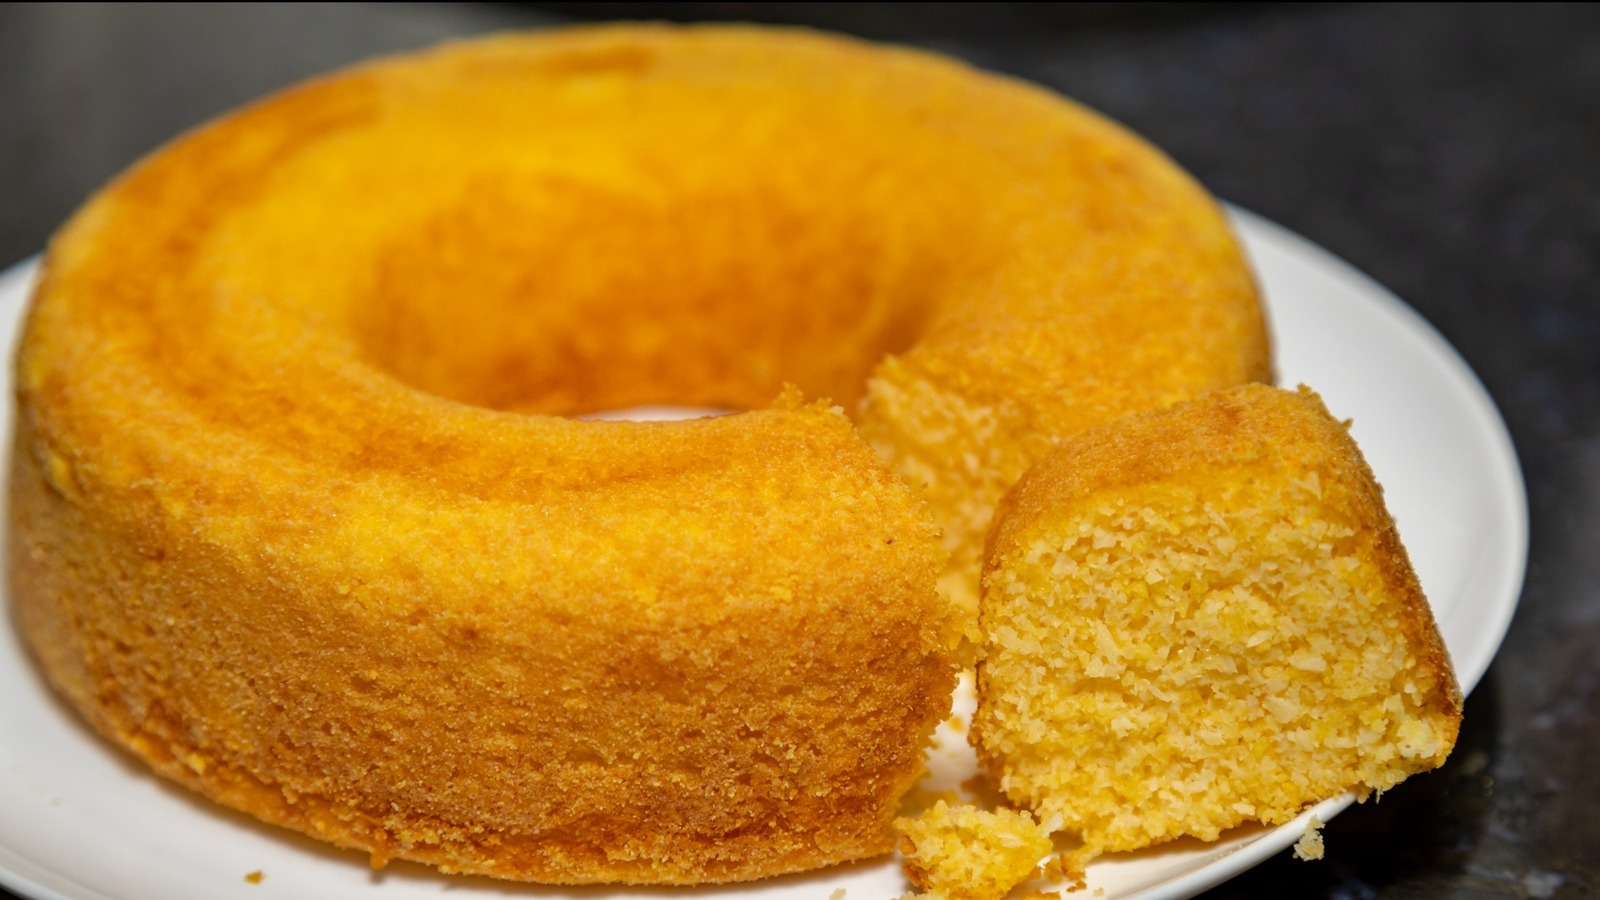 What's the Difference Between Bundt Pans, Sponge Cake Pans, and Chiffon Pans?